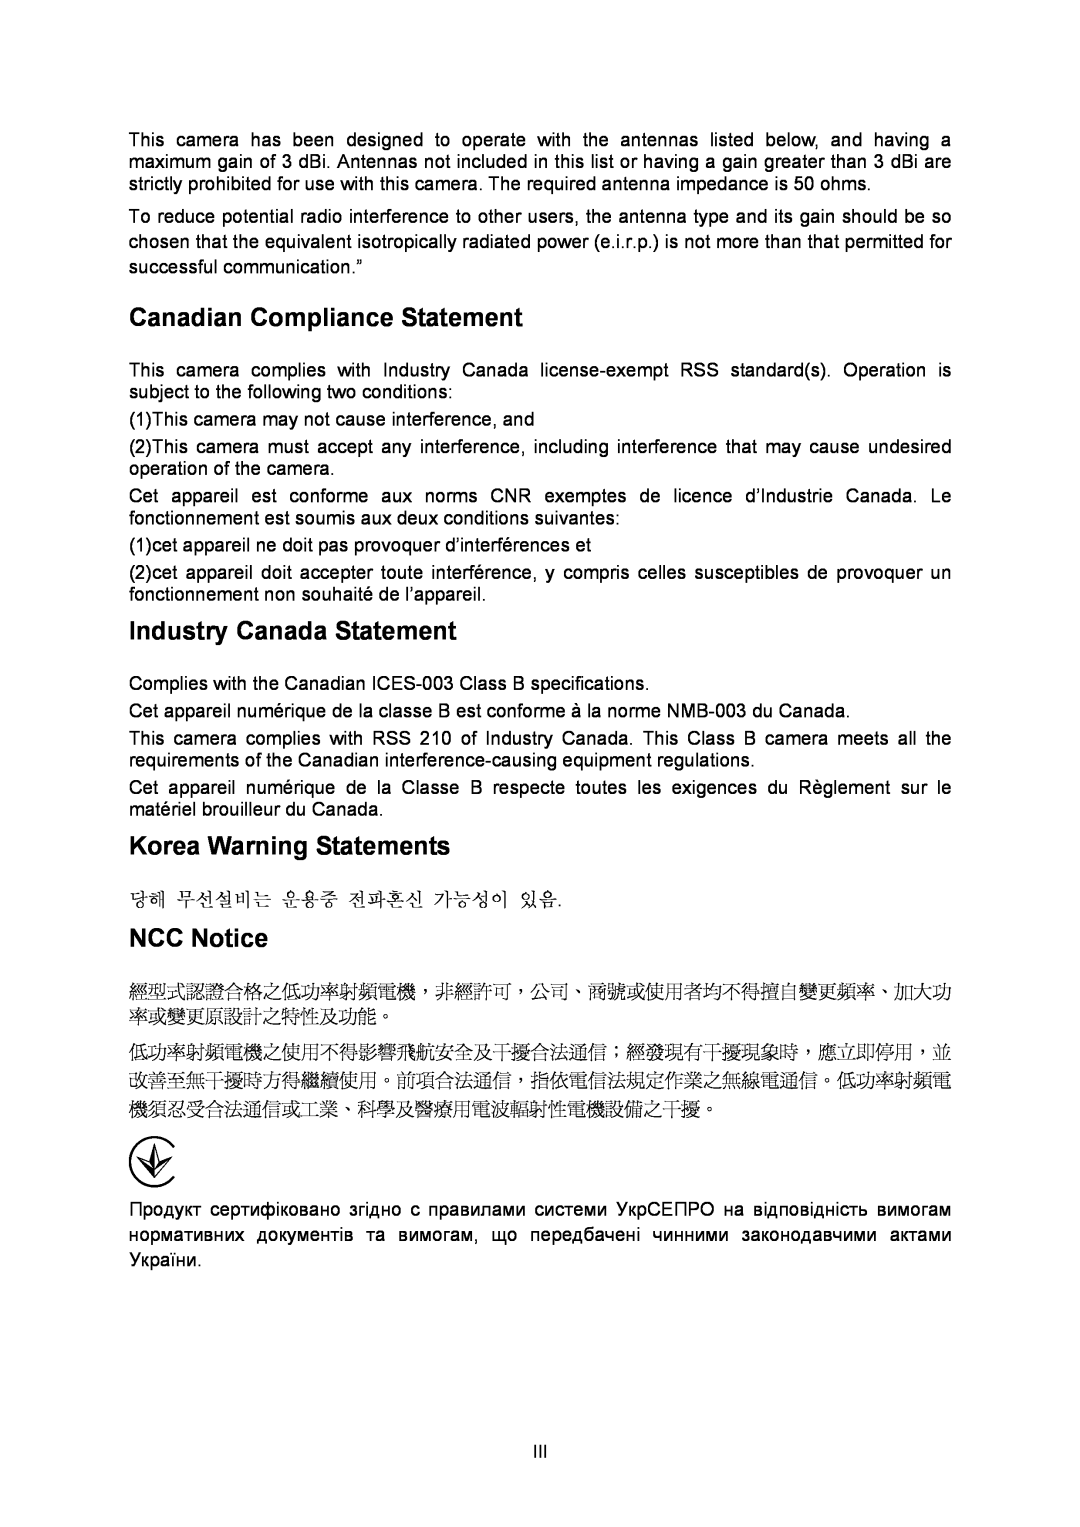 TP-Link TL-SC3230N manual Canadian Compliance Statement, Industry Canada Statement, Korea Warning Statements, NCC Notice 